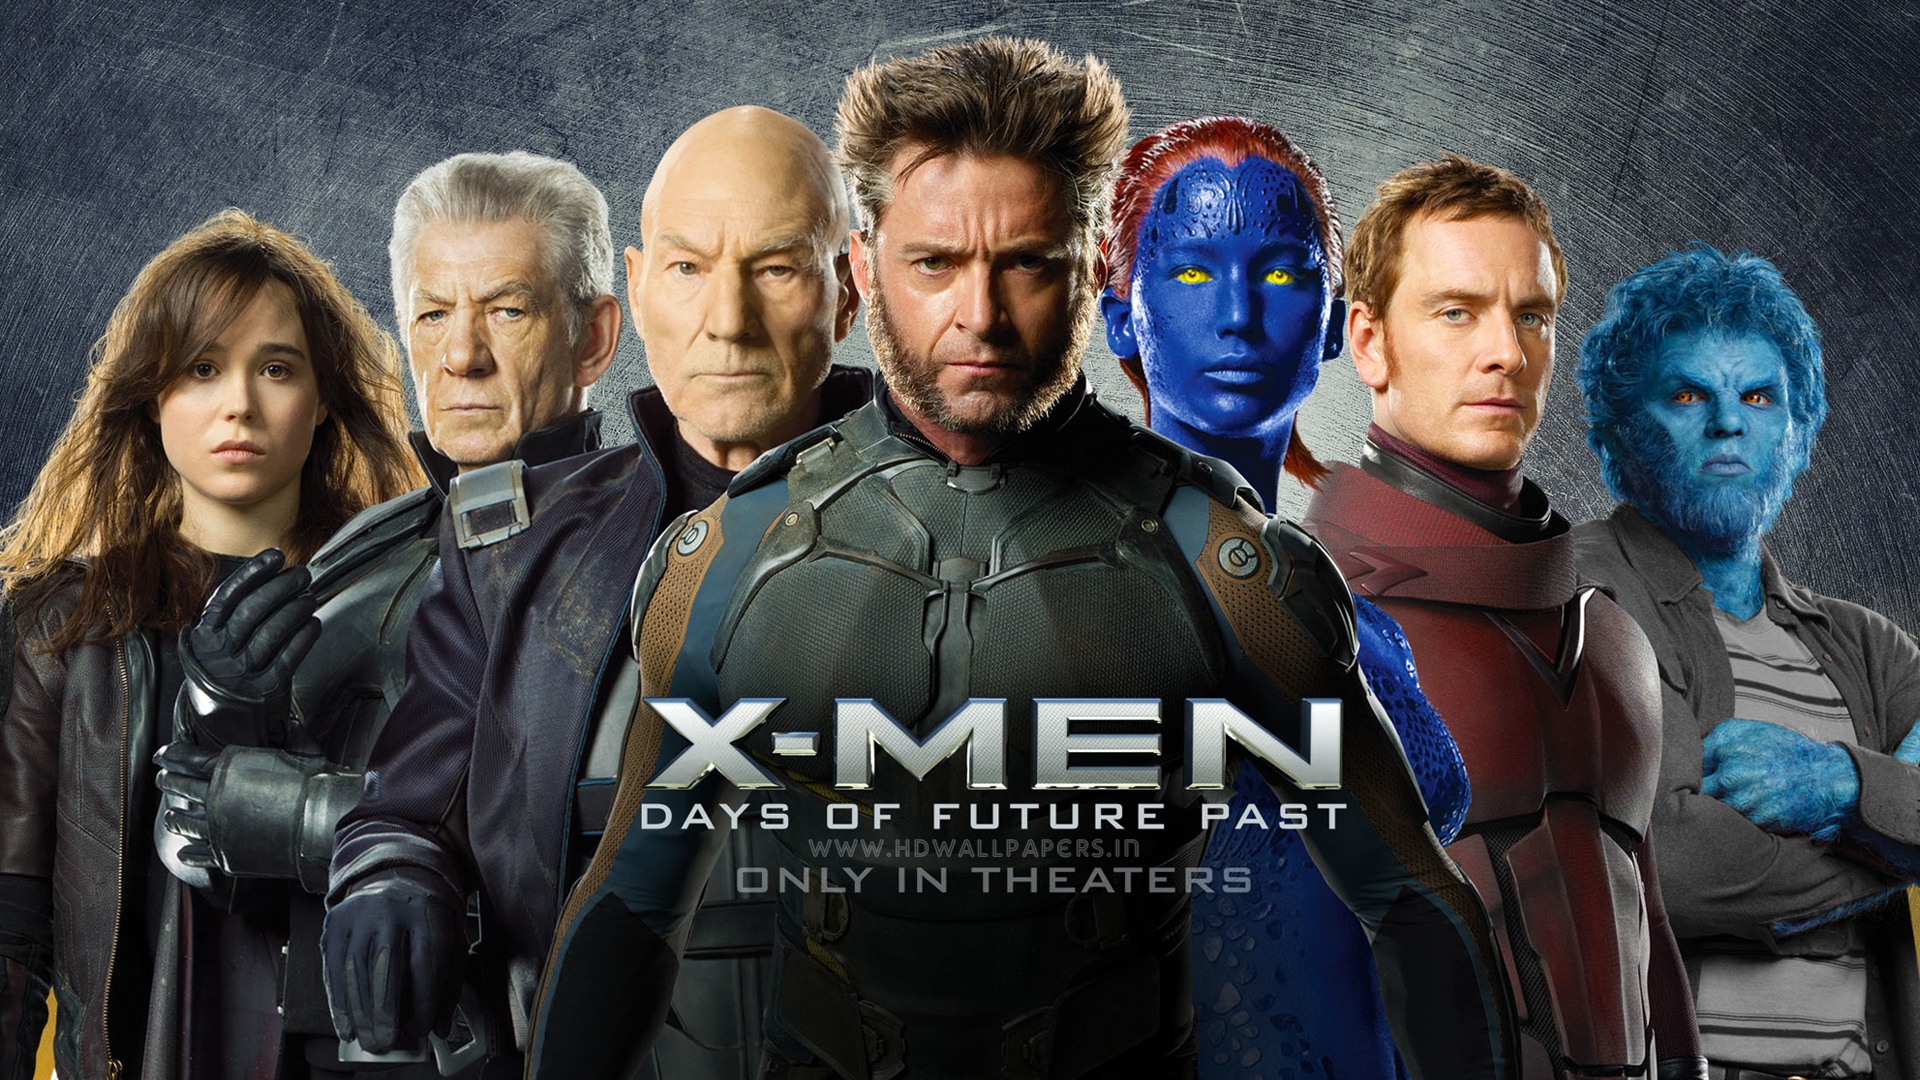 xmen days of future past - Marvel Live-action Movies ...